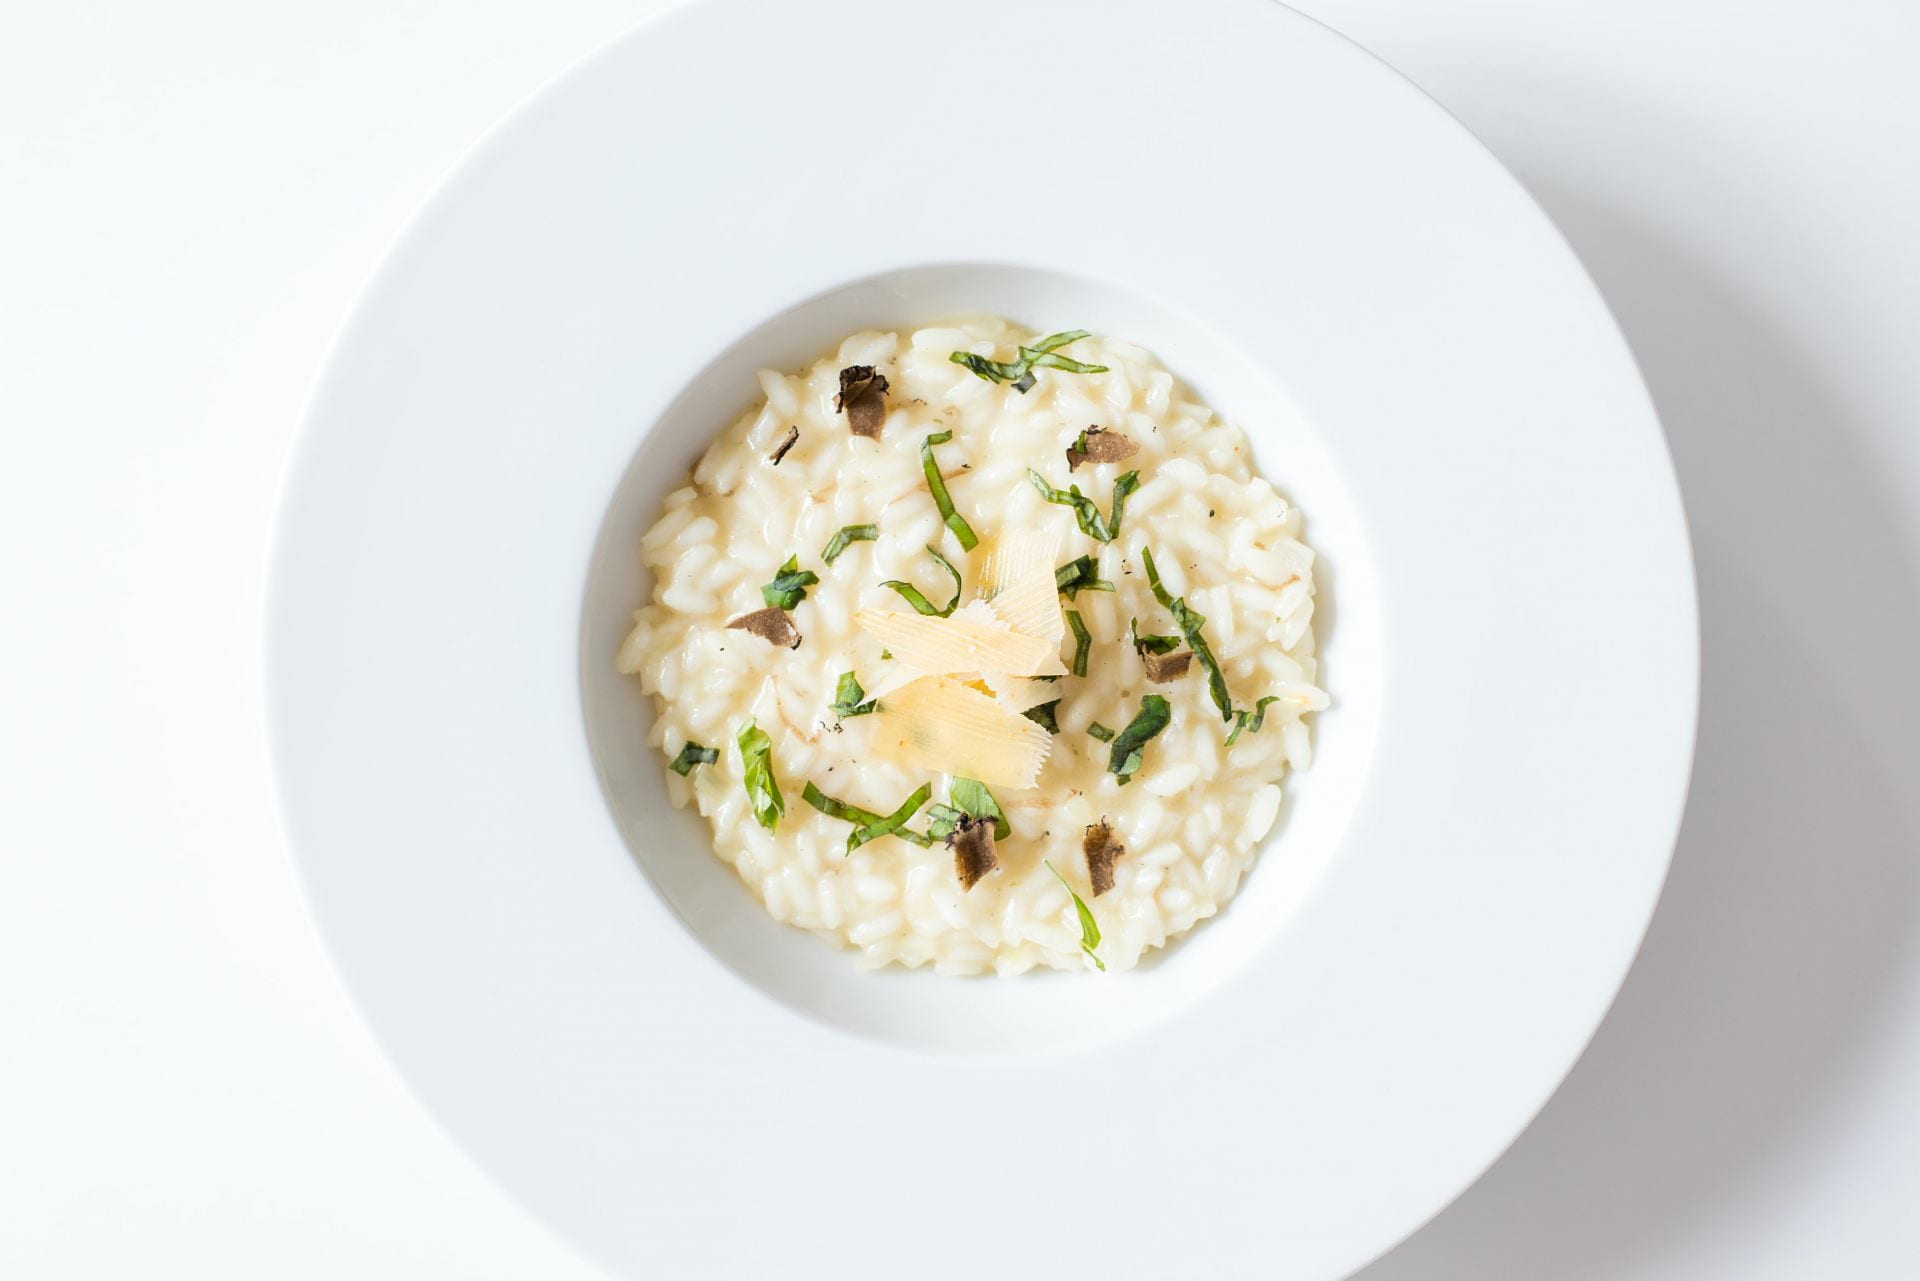 A white bowl filled with risotto. On top of the risotto is some green strands and parmesan flakes.